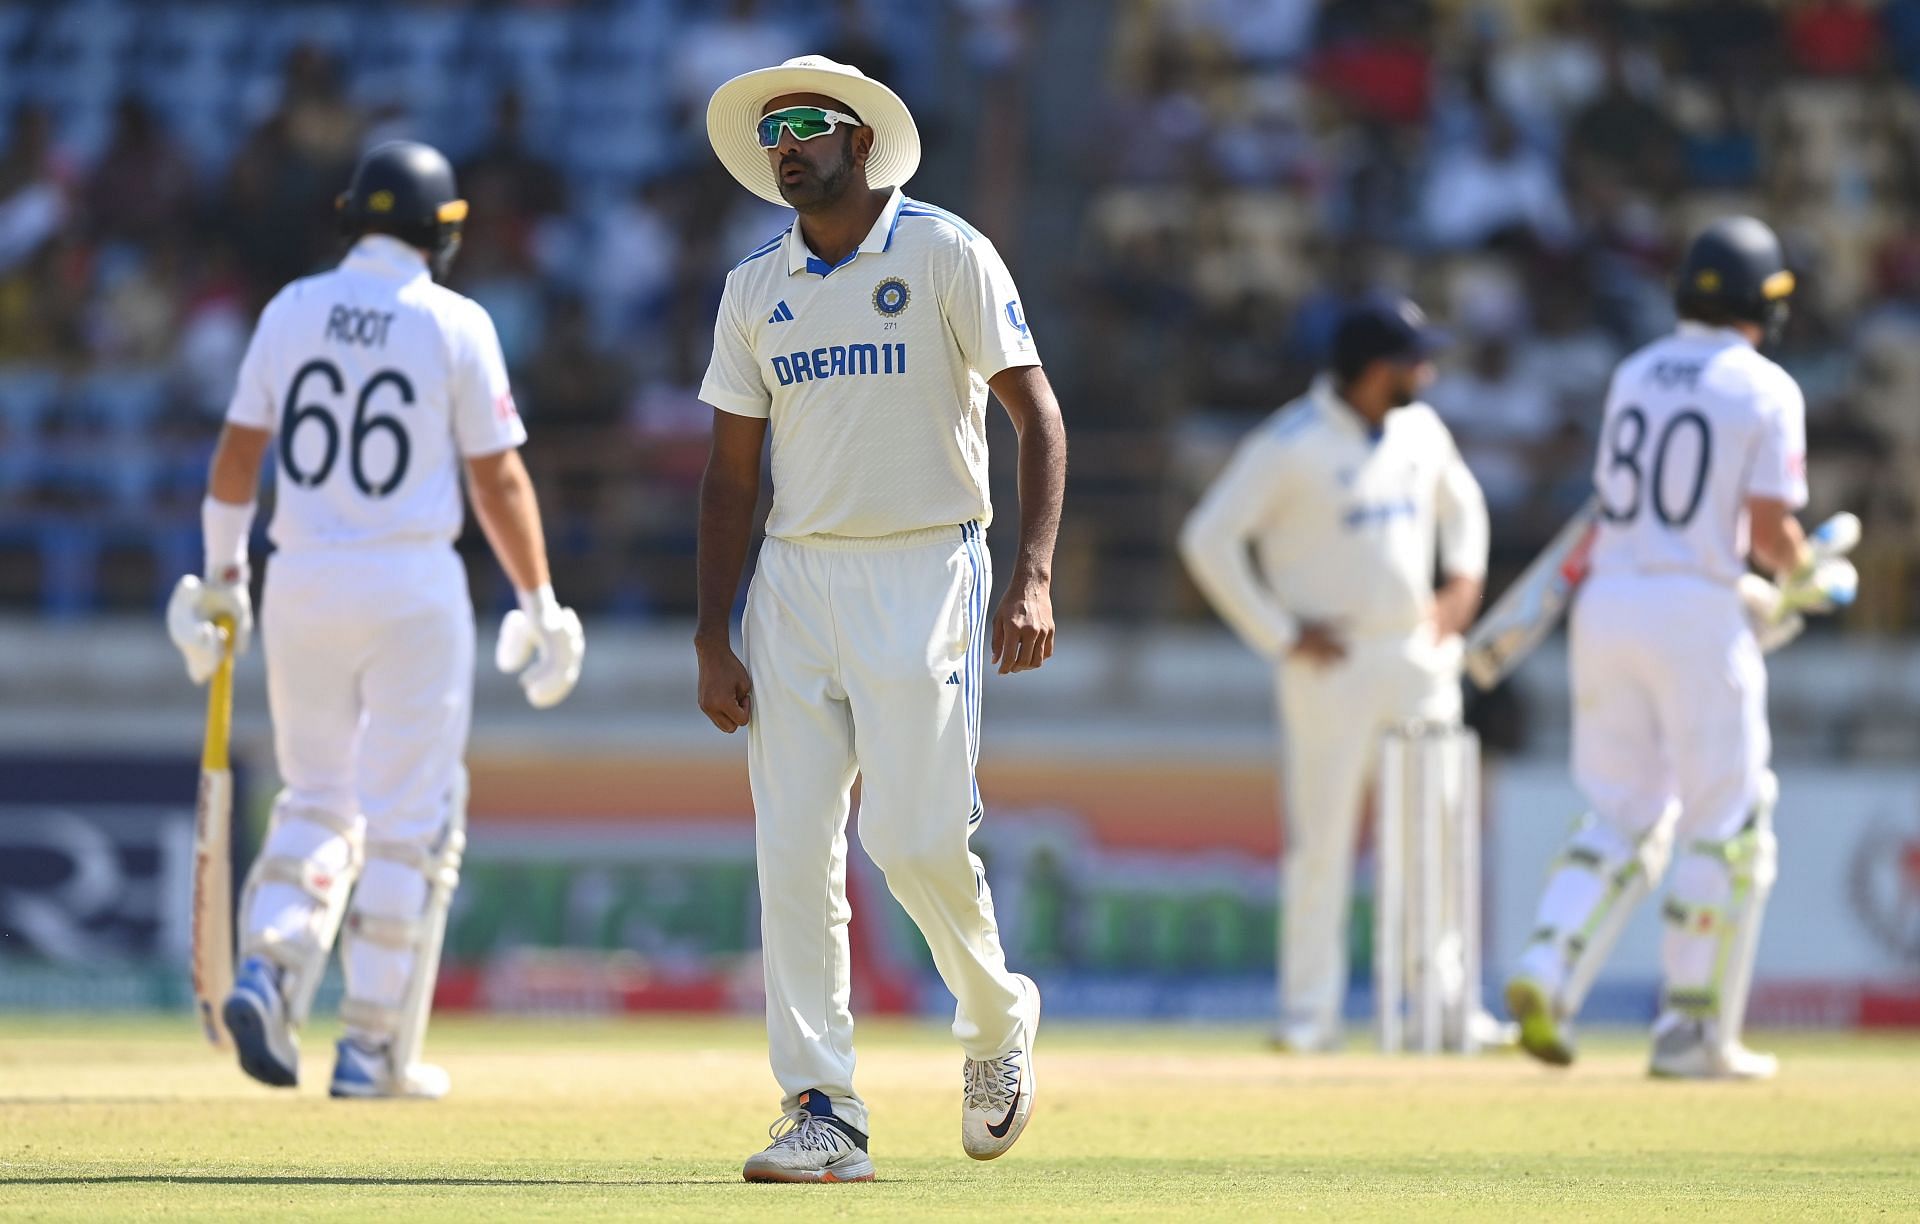 India v England - 3rd Test Match: Day Four